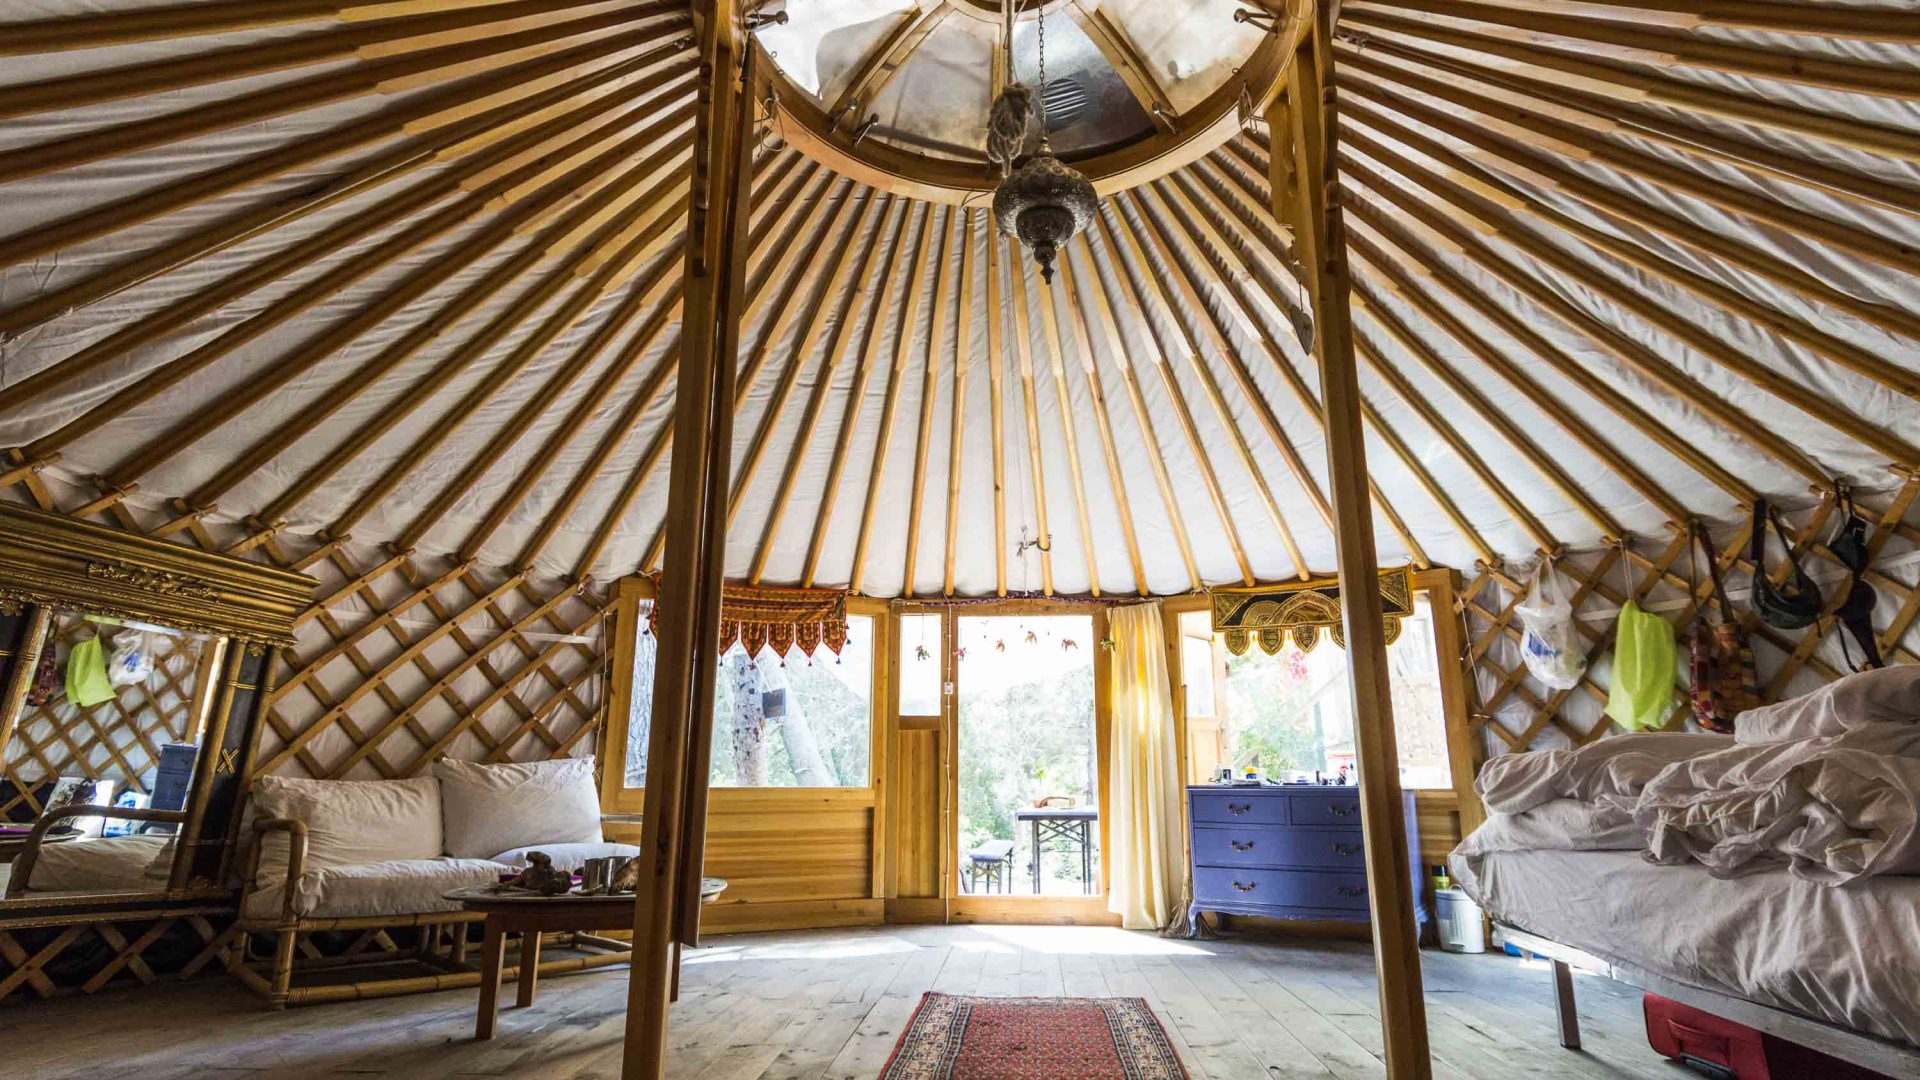 The interior of a yurt with tall beamed ceiling.